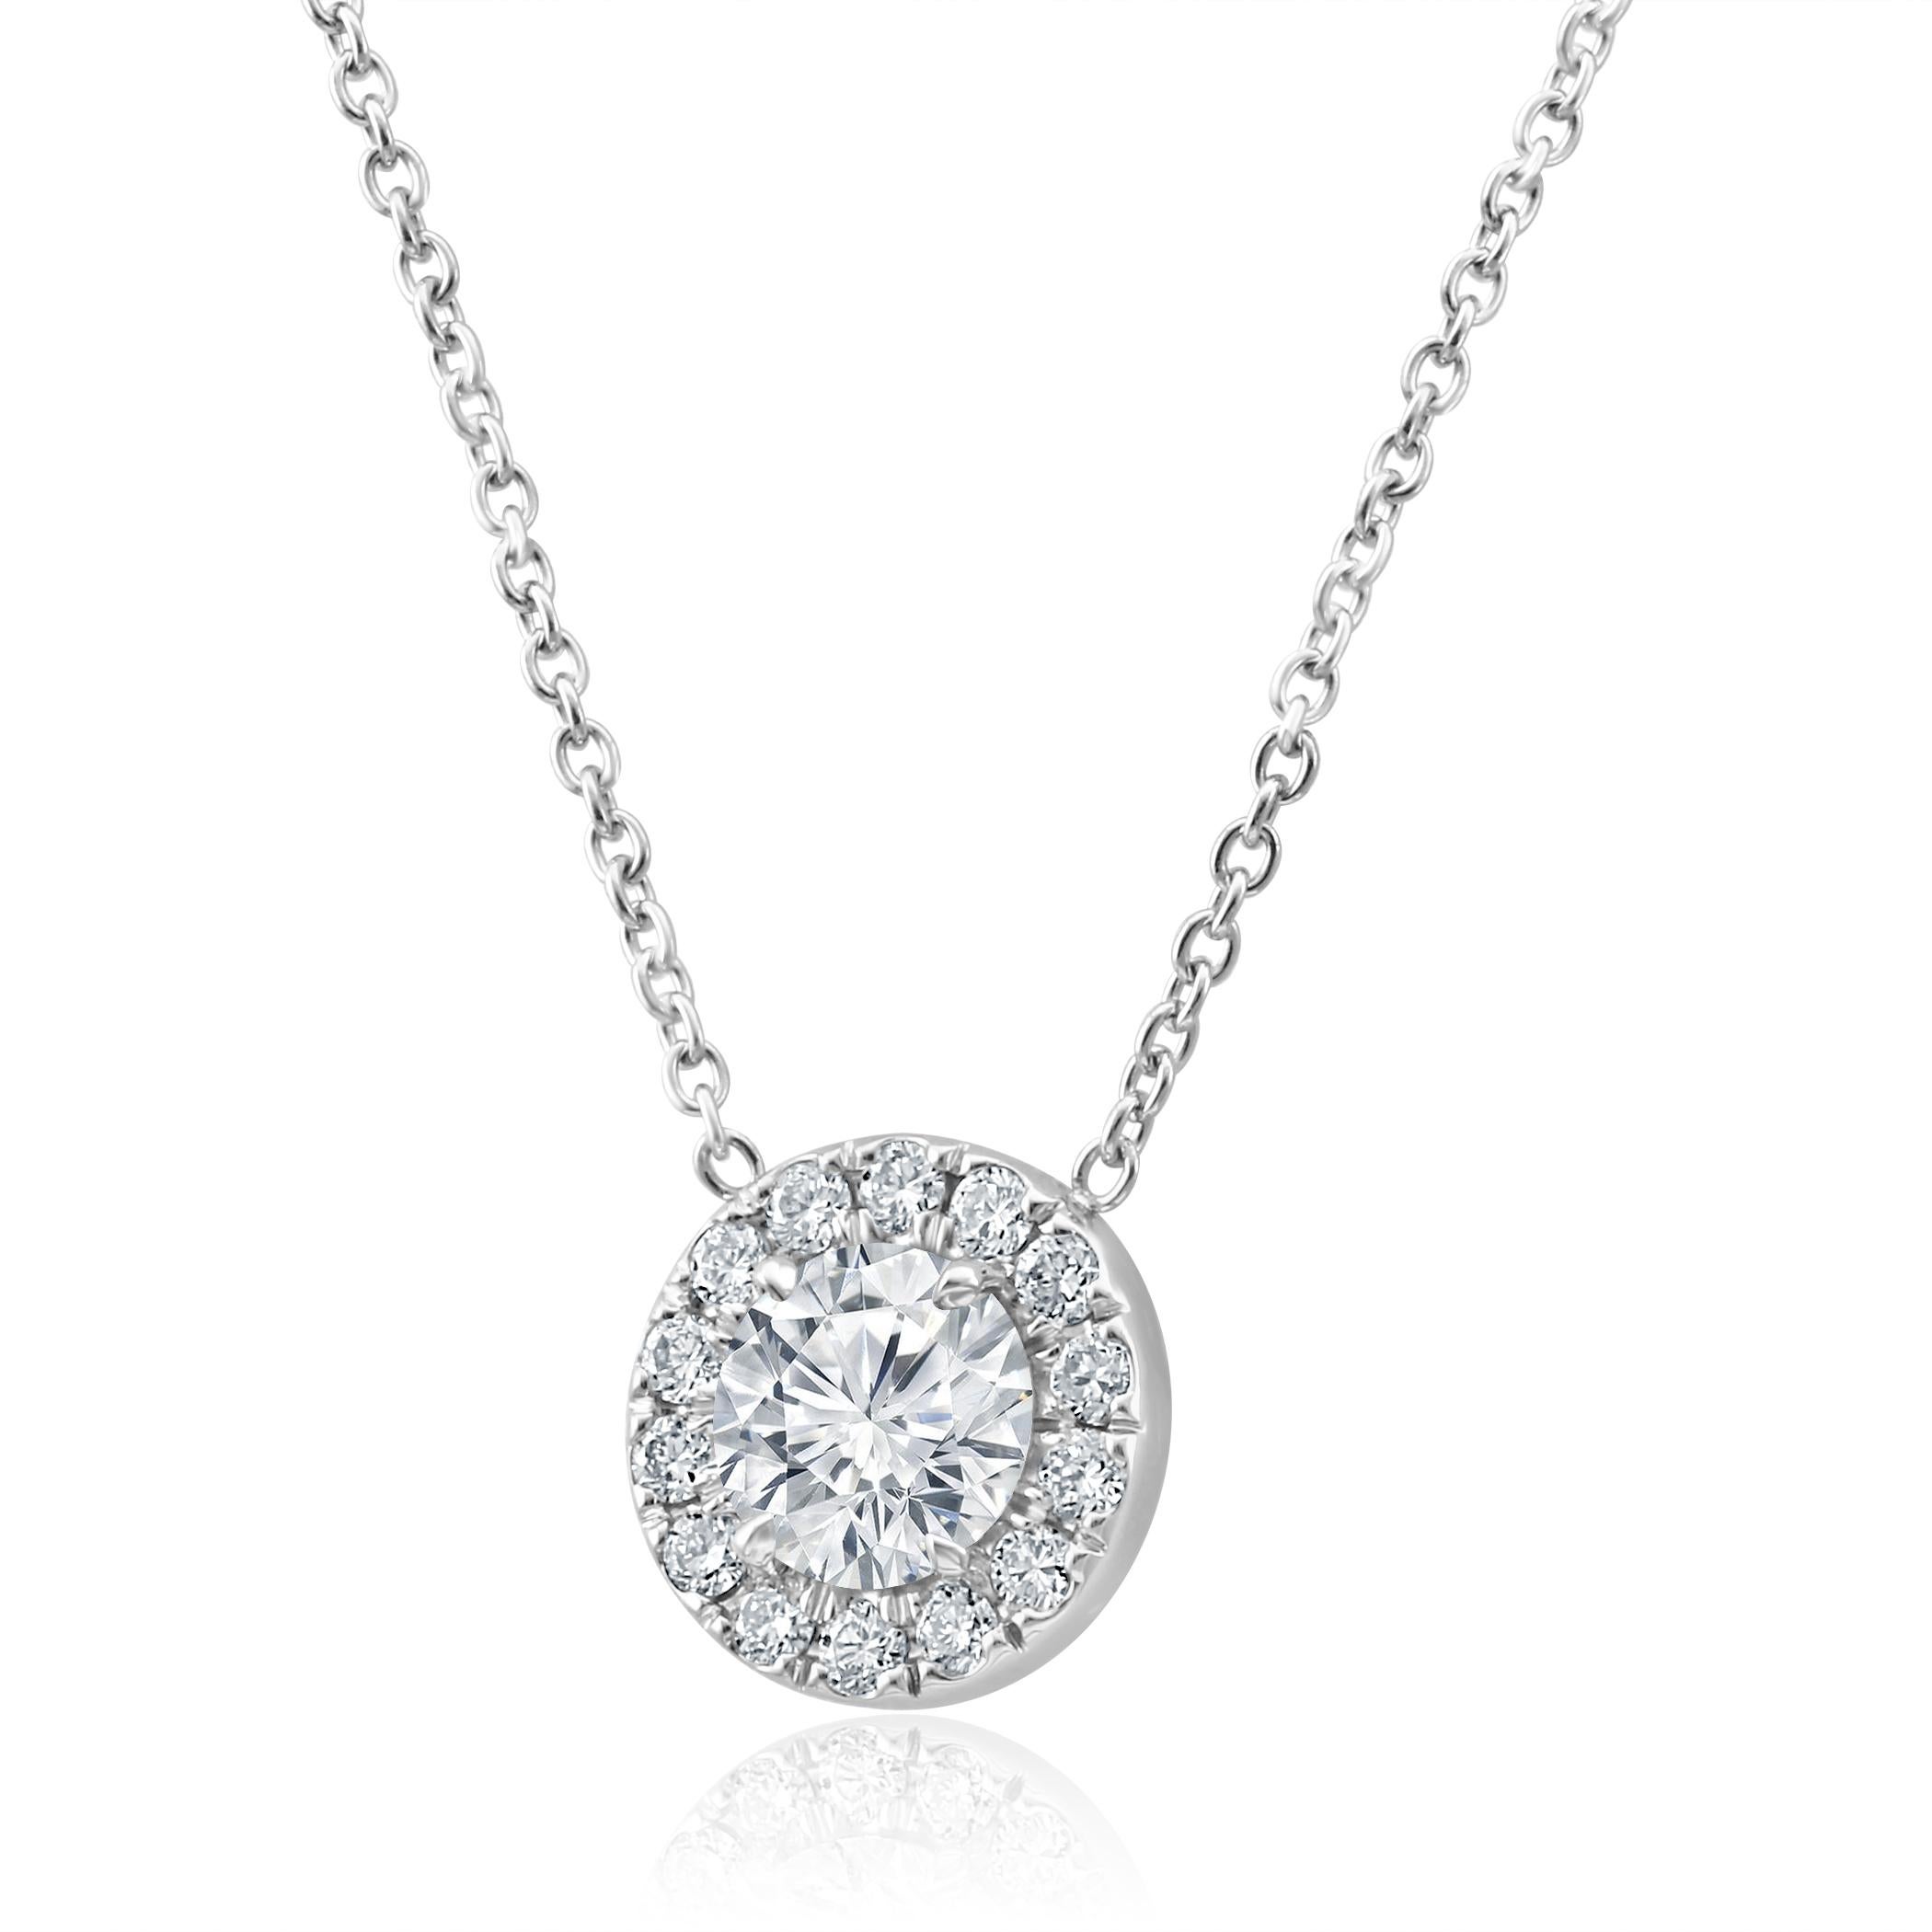 Stunning 1 White Colorless Diamond G-H Color SI-I Clarity 1.05 Carat encircled in a single halo of 14 G-H Color SI Round Diamonds 0.25 Carat set in 14K White Gold Solitaire Everyday wear Perfect for all occasion Necklace.

Style available in